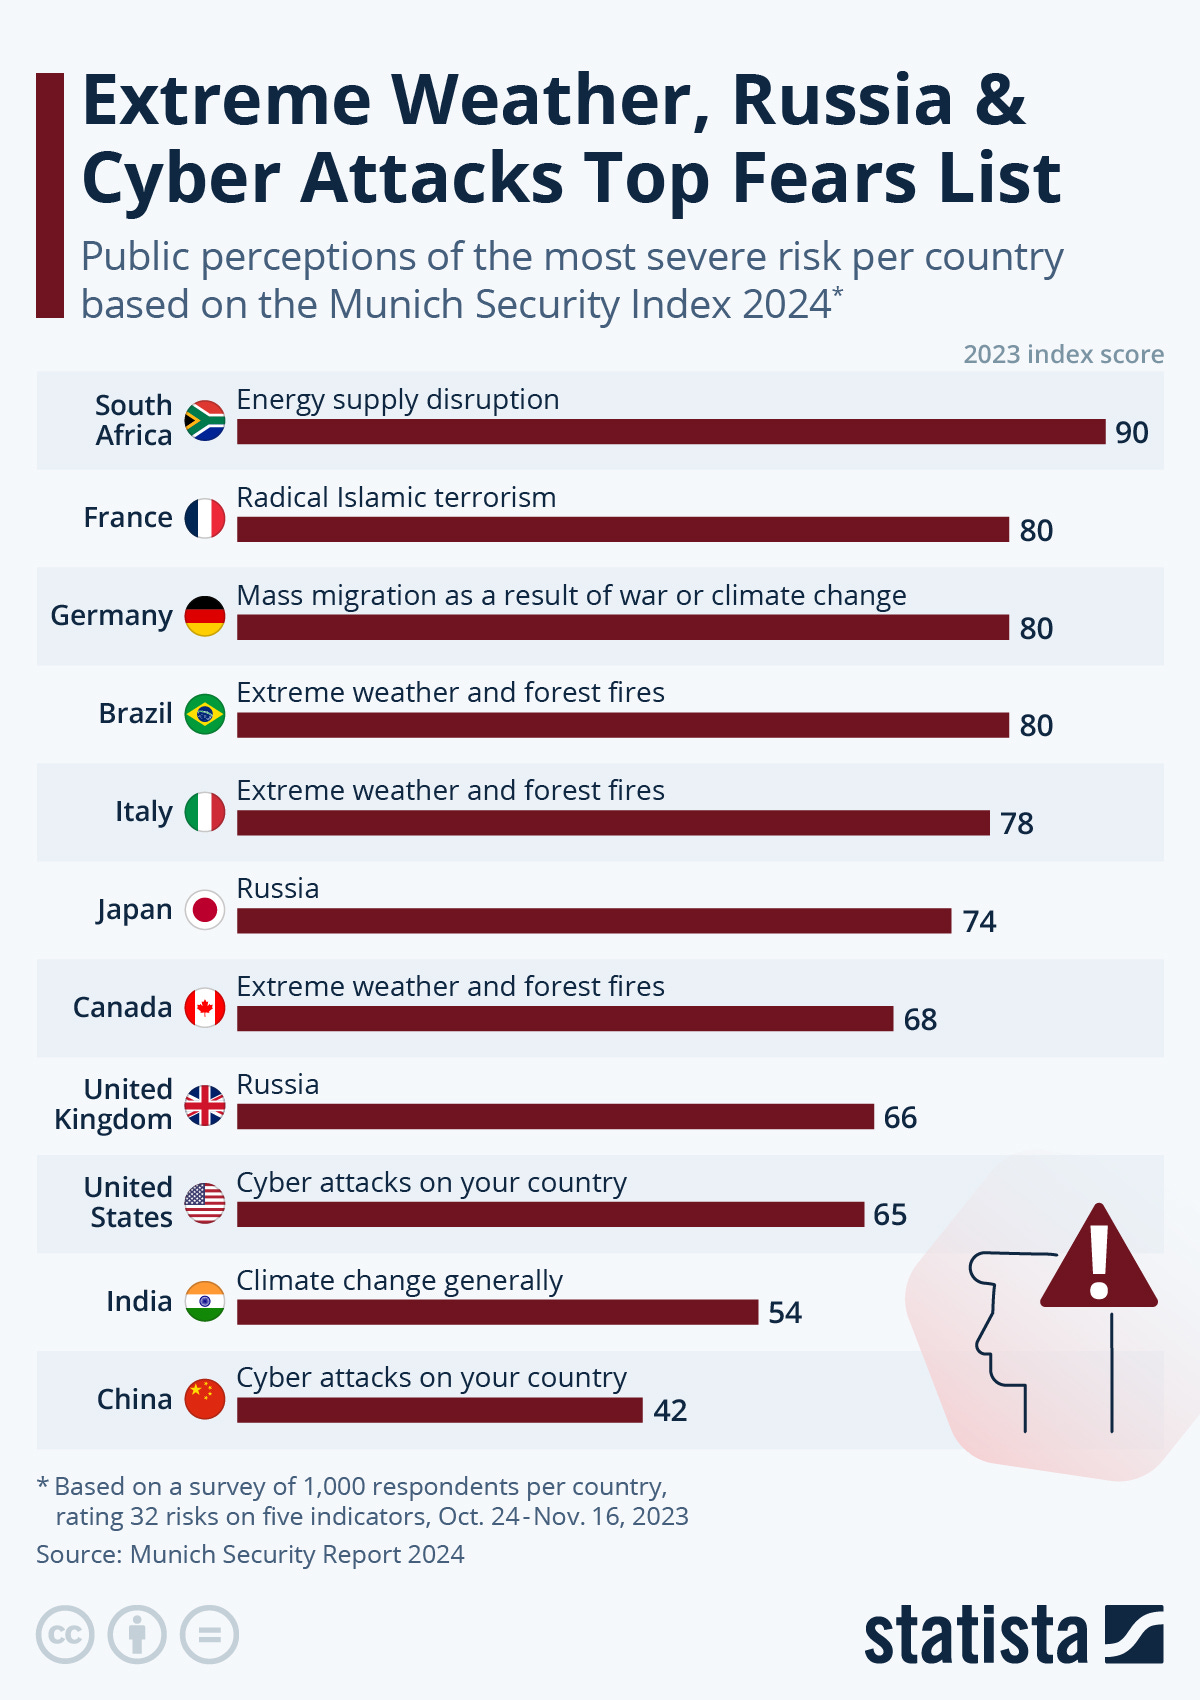 Based on a survey of 1,000 respondents per country, rating 32 risks on five indicators, between 24 October and 16 November, 2023 the following are the most severe risk per country and their 2023 index score: South Africa - energy supply disruption (90), France - radical Islamic terrorism (80), Germany - mass migration as a result of war or climate change (80), Brazil - extreme weather and forest fires (80), Italy - extreme weather and forest fires (78), Japan - Russia (74), Canada - extreme weather and forest fires (68), the U.K. - Russia (66), the U.S. - cyber attacks (65), India - climate change (54), and China - cyber attacks (42).